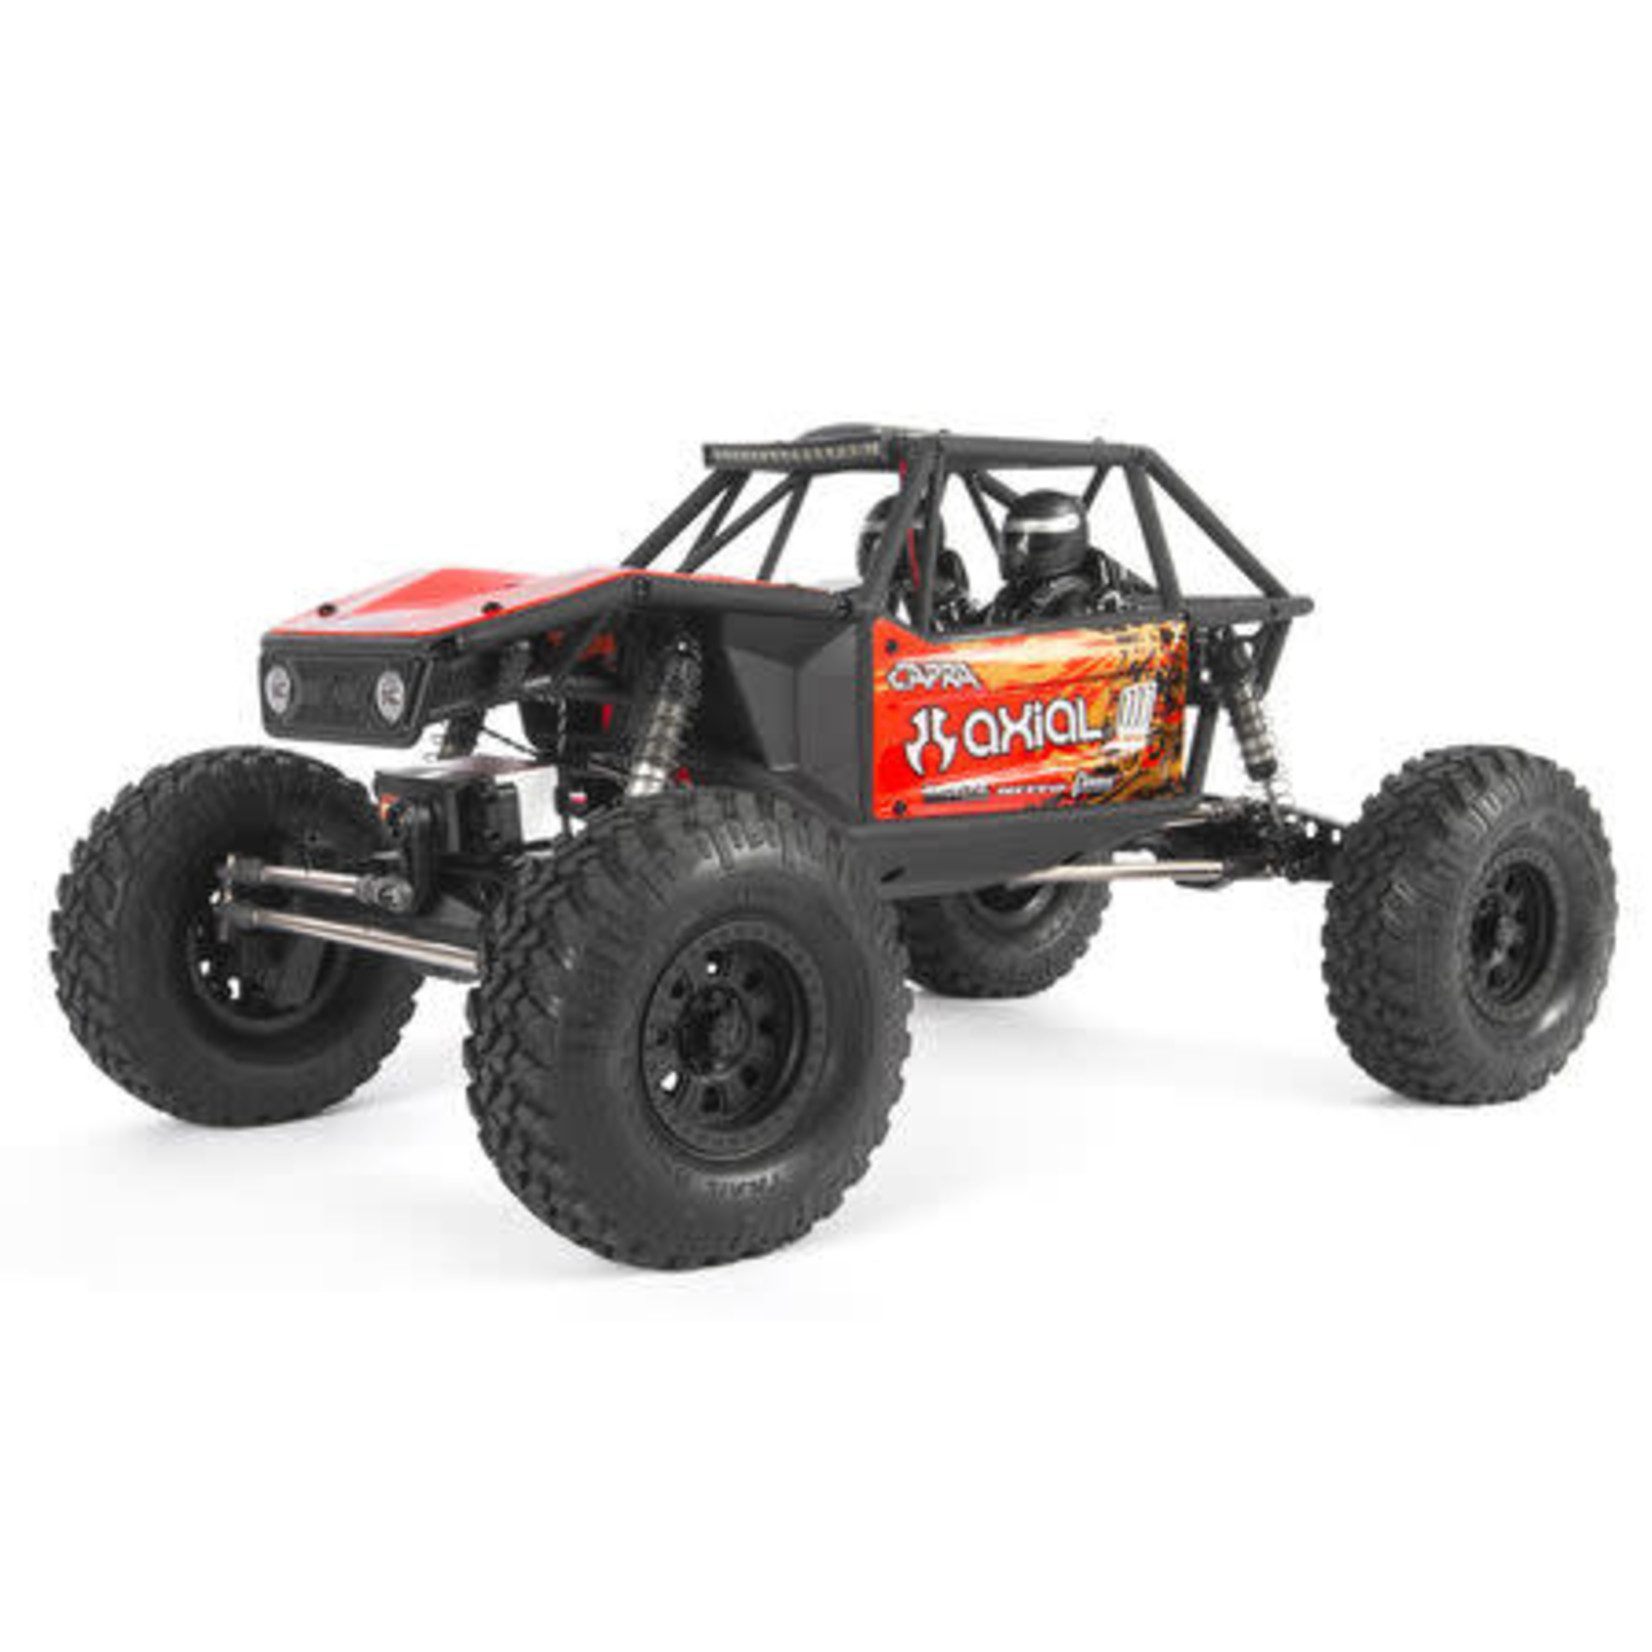 Axial 1/10 CAPRA 1.9 UNLIM. TRAIL BUGGY 4WD RED